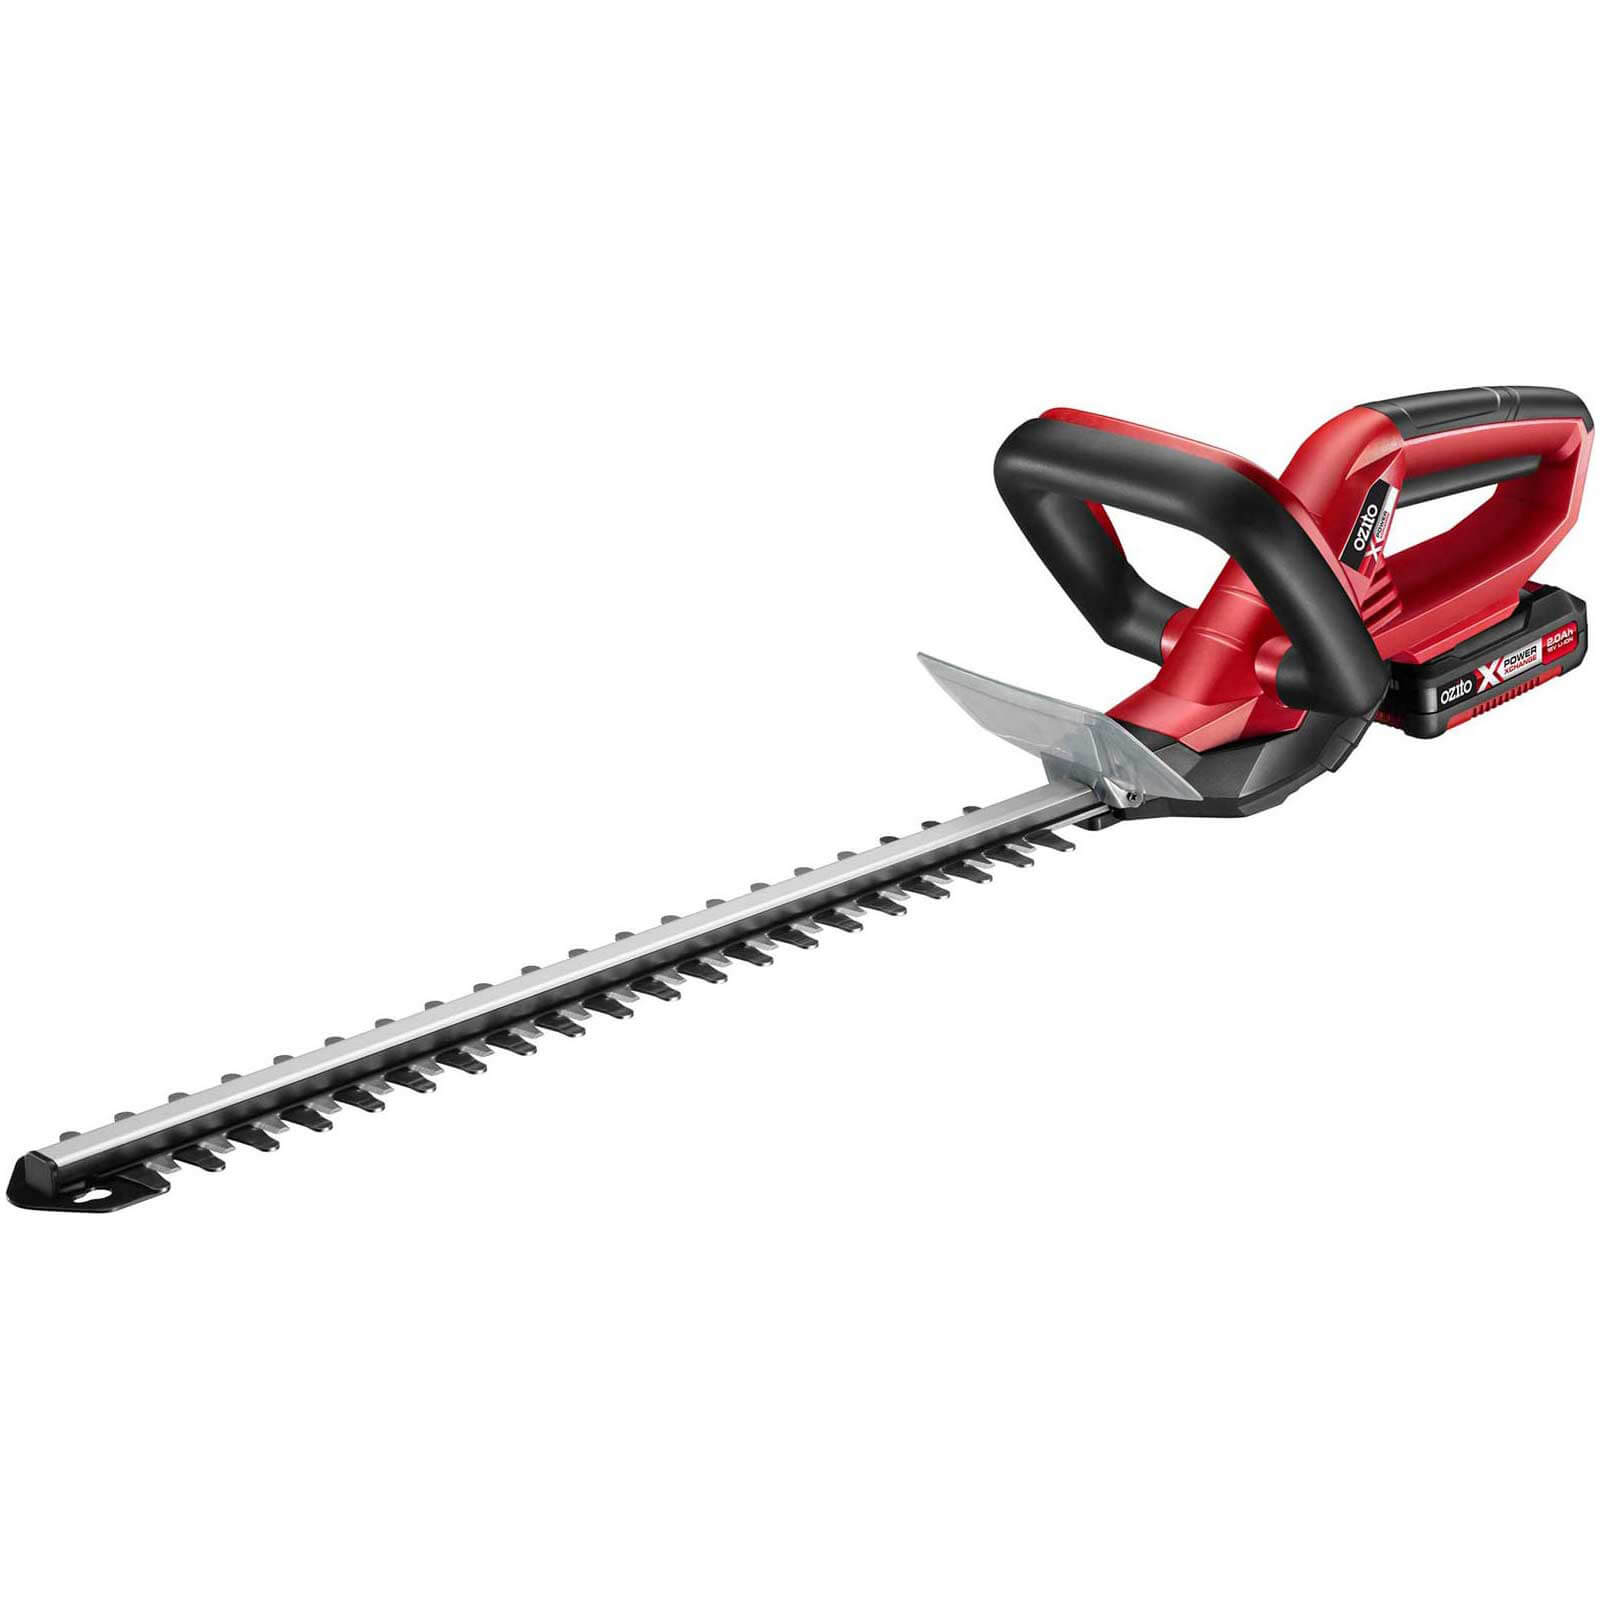 Commercial hedge trimmer